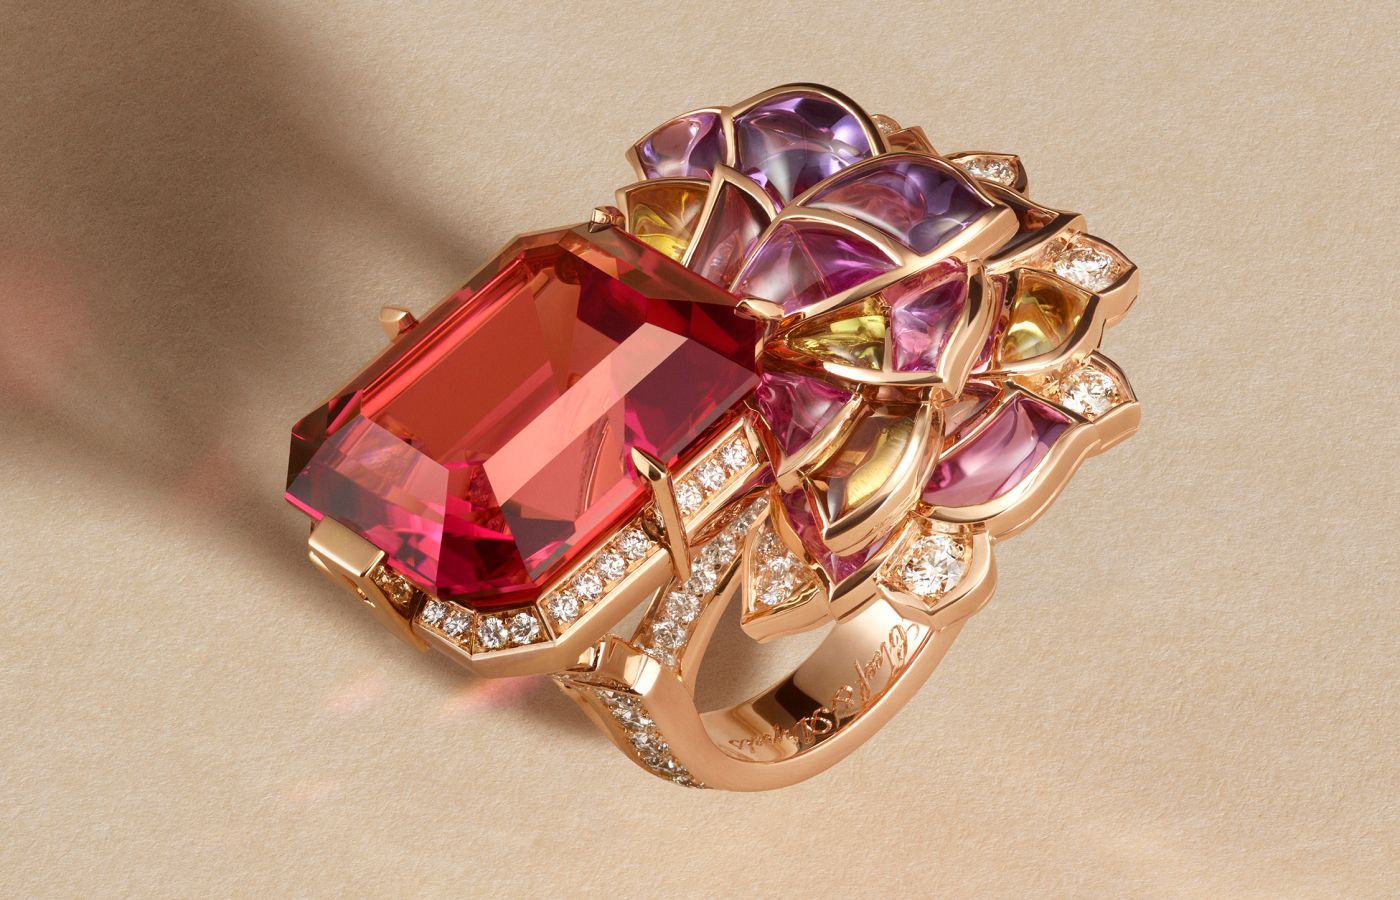 Van Cleef & Arpels Jardin de La Rose ring in rose gold, a 23.67-ct emerald-cut rubellite, coloured sapphires and diamonds from Le Grand Tour High Jewellery collection